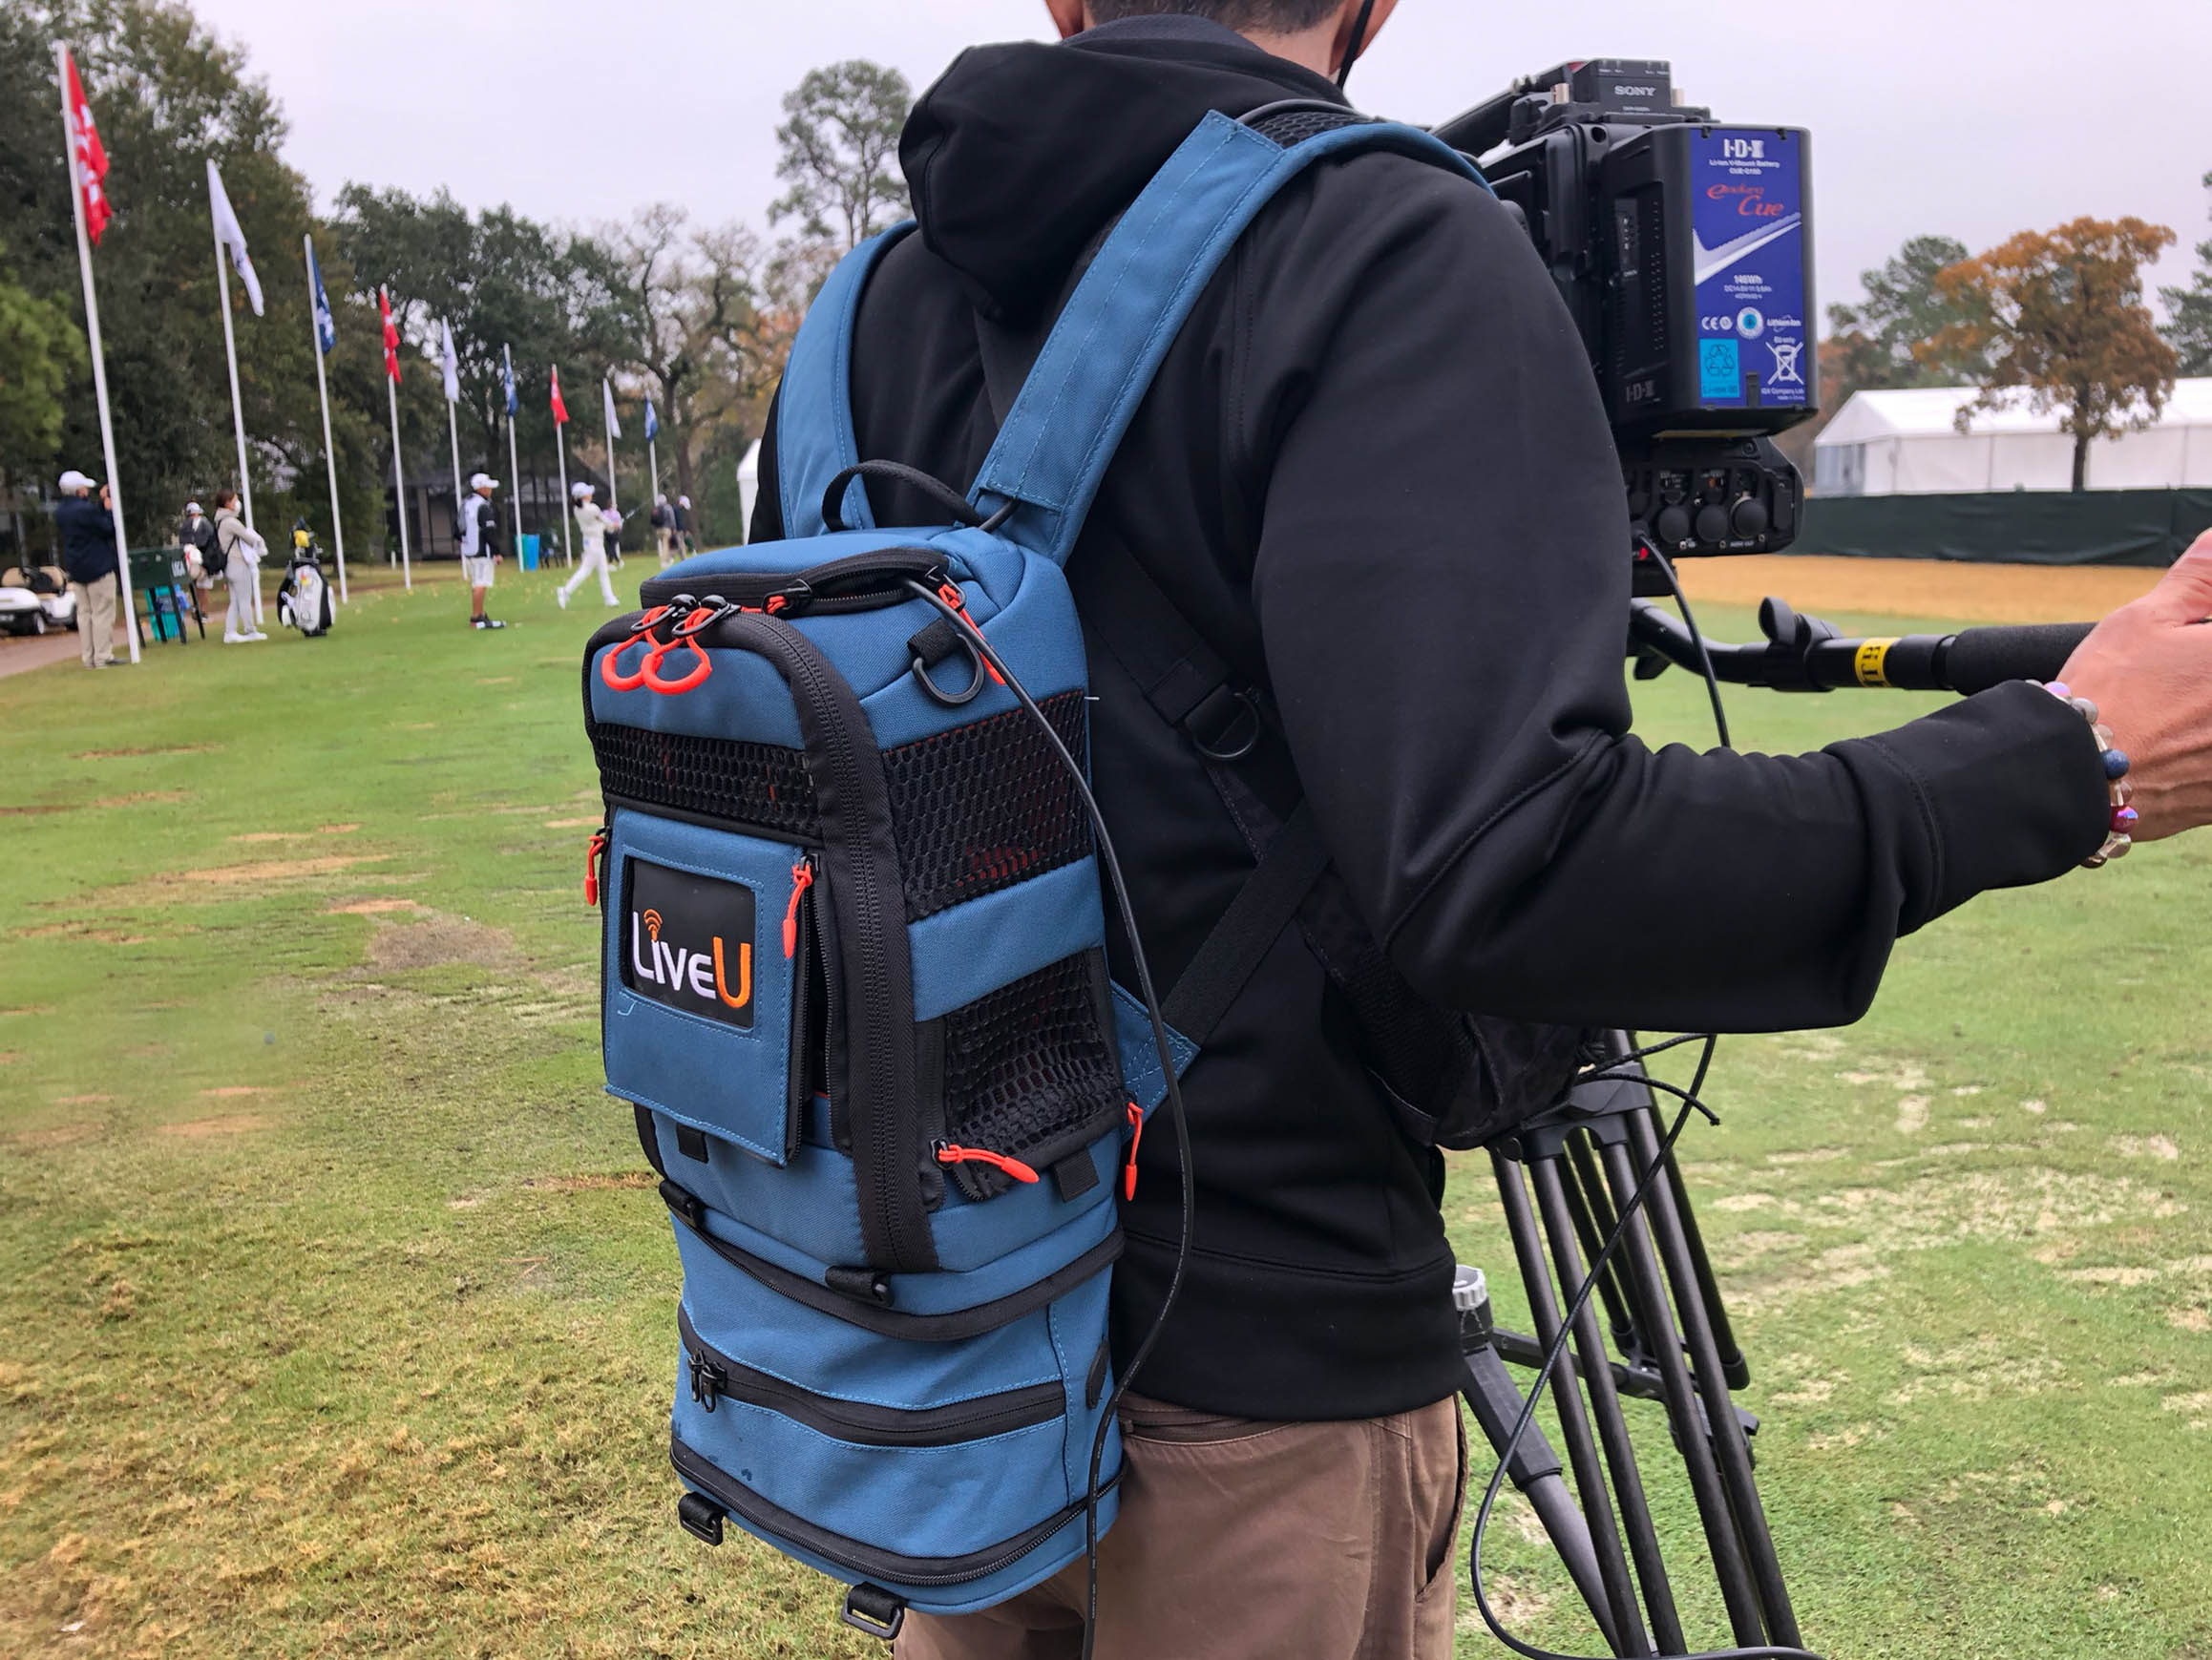 Japans WOWOW Covers 2020 US Womens Open Golf With LiveU Multi-Camera Sports Remote Production